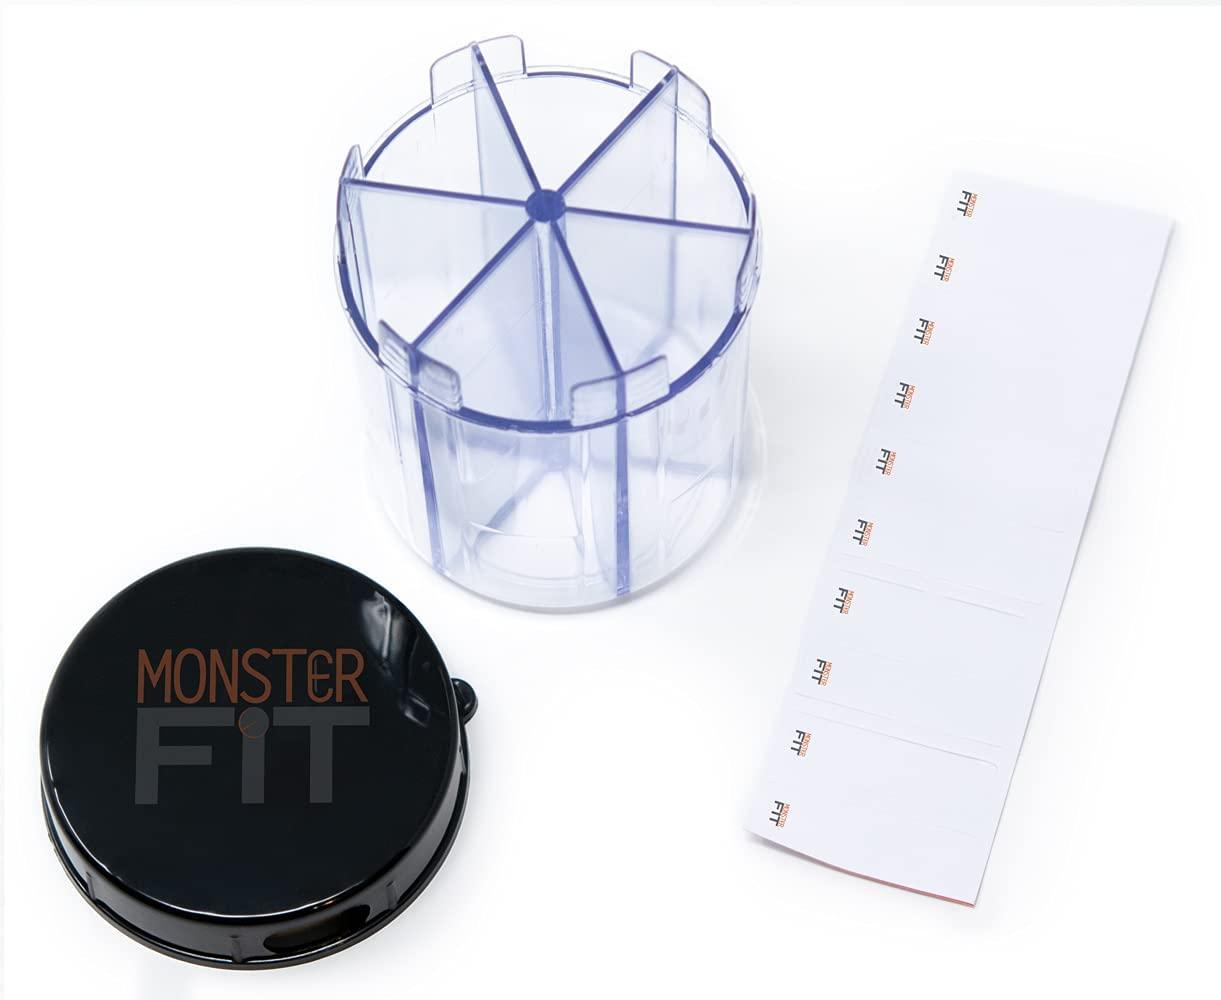 Monster Supplement Medicine Pill Organizer Dispenser, 7 Compartments and  Labels, EZ Open Bottle, Extra Large Holder Fits a Month Plus of Almost Any